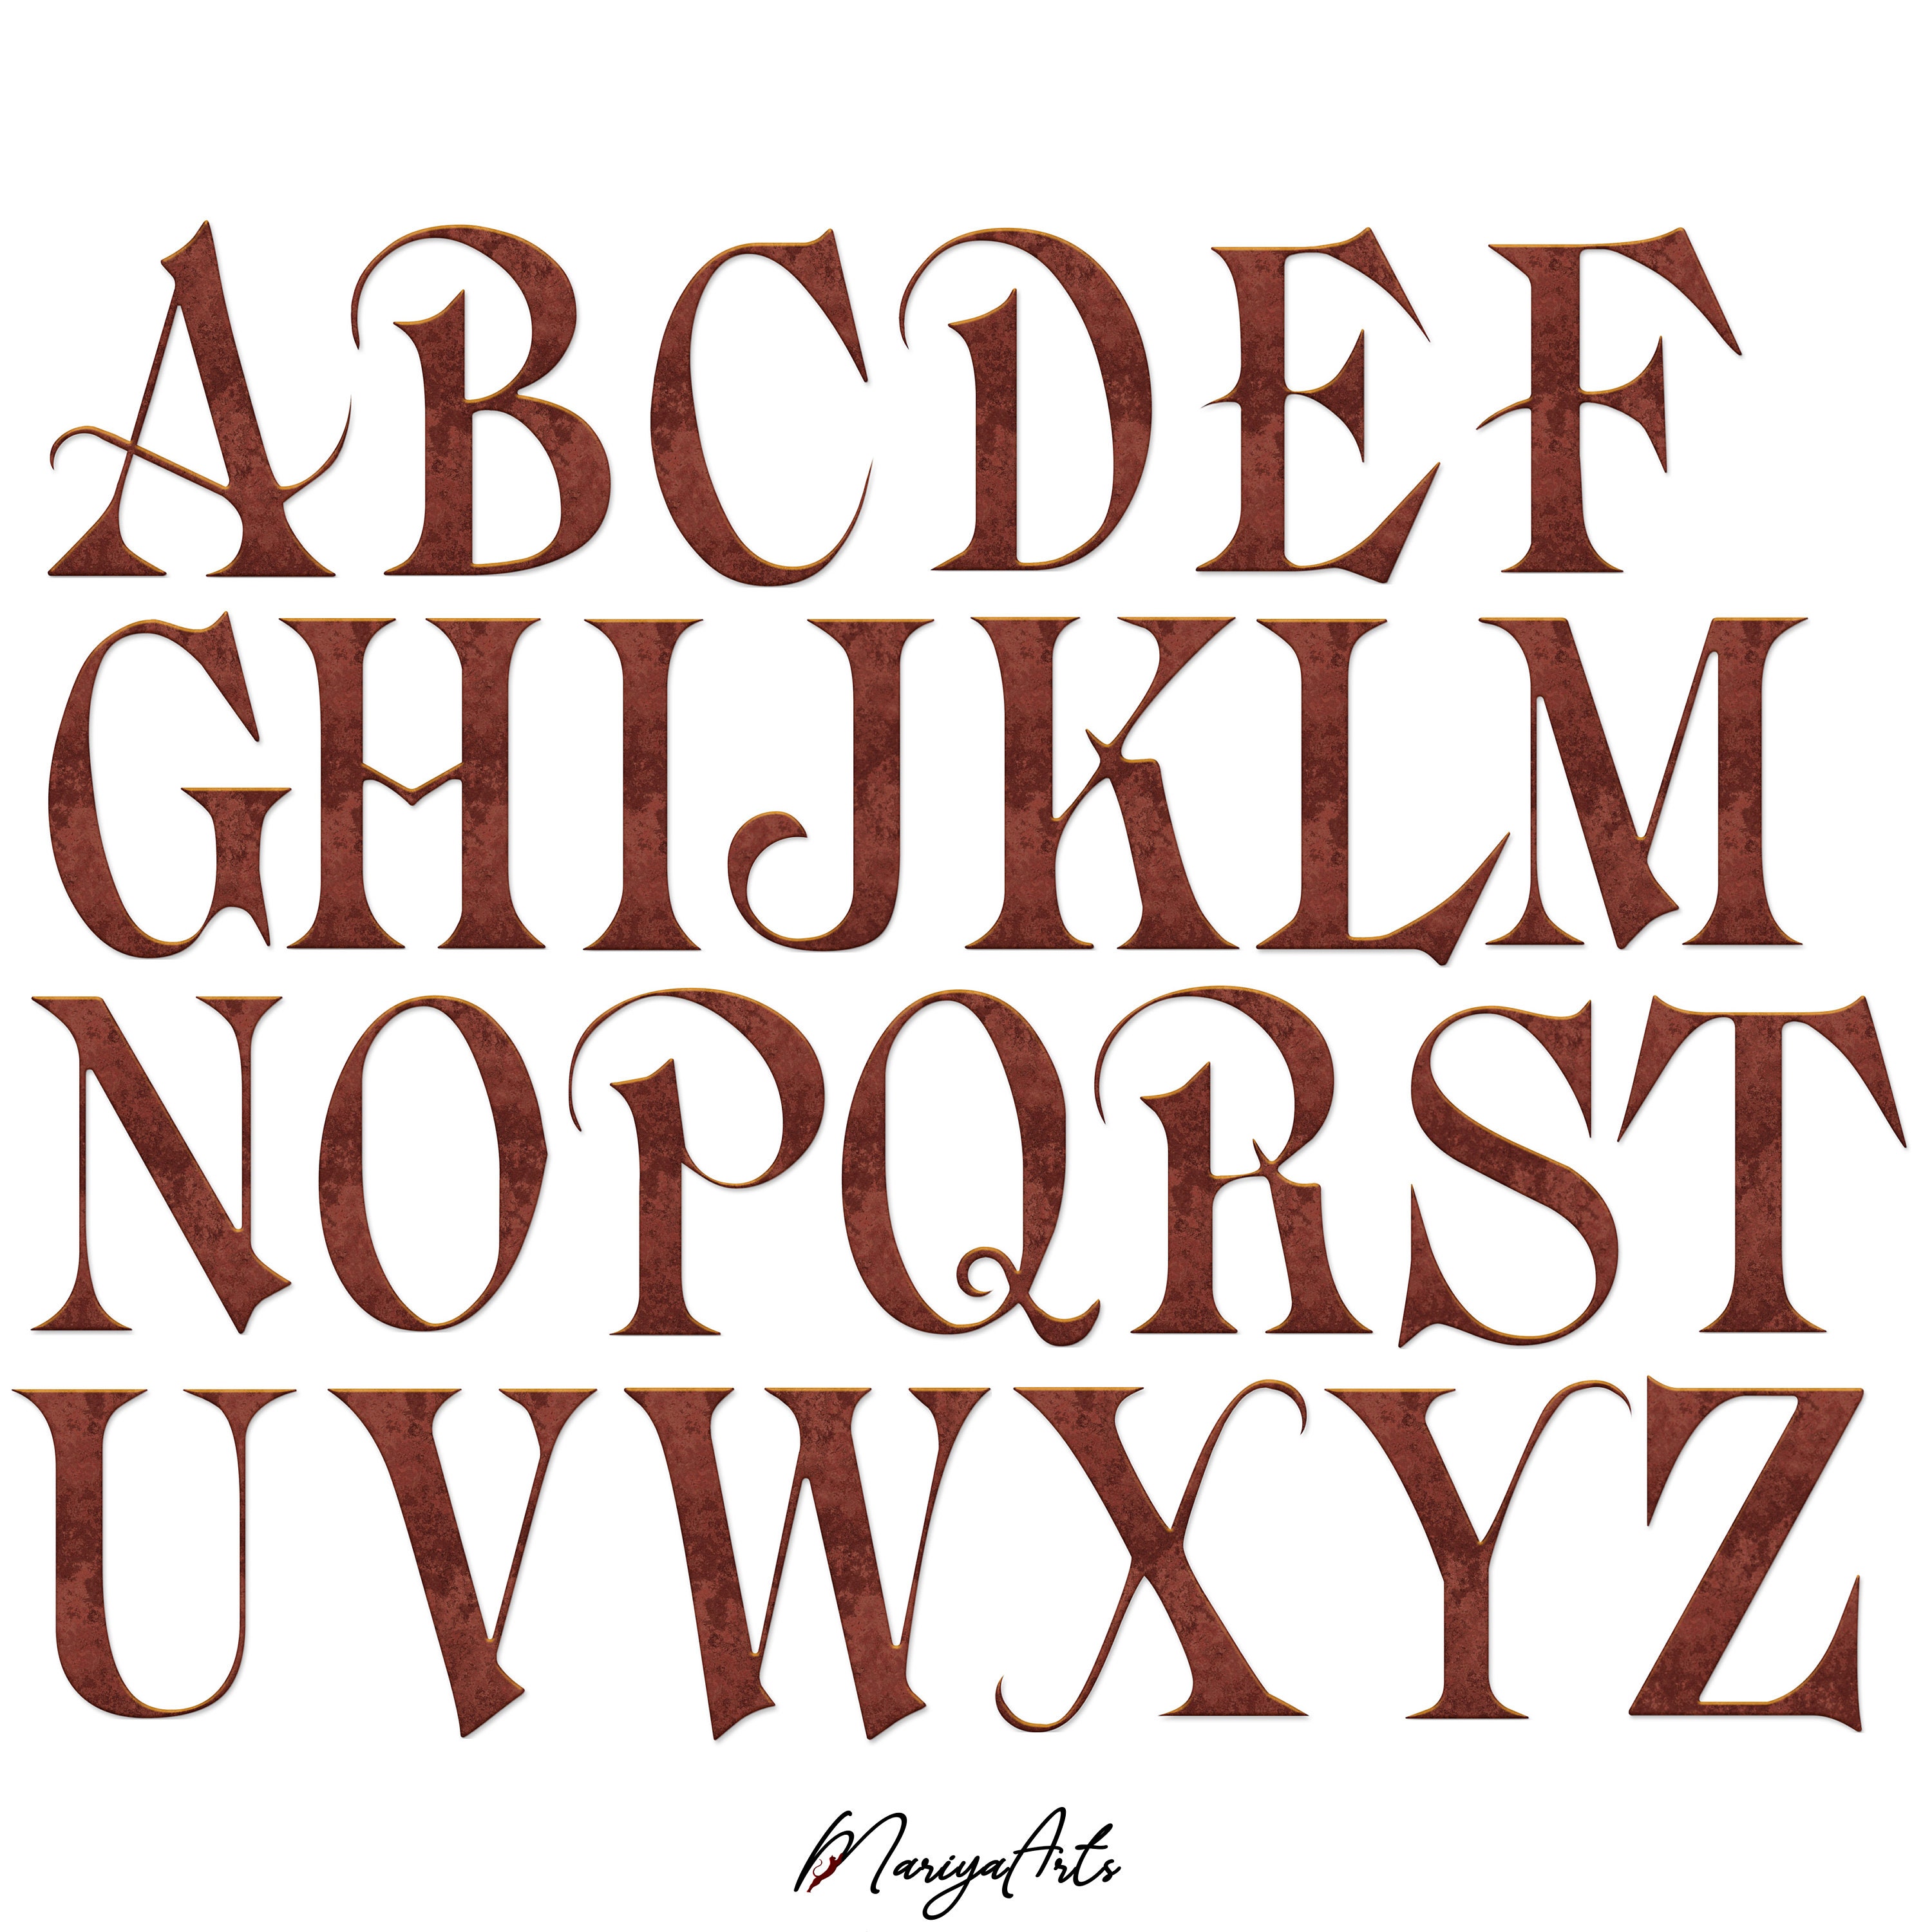 old-english-alphabet-letters-and-numbers-rusty-metal-latin-alphabet-a-z